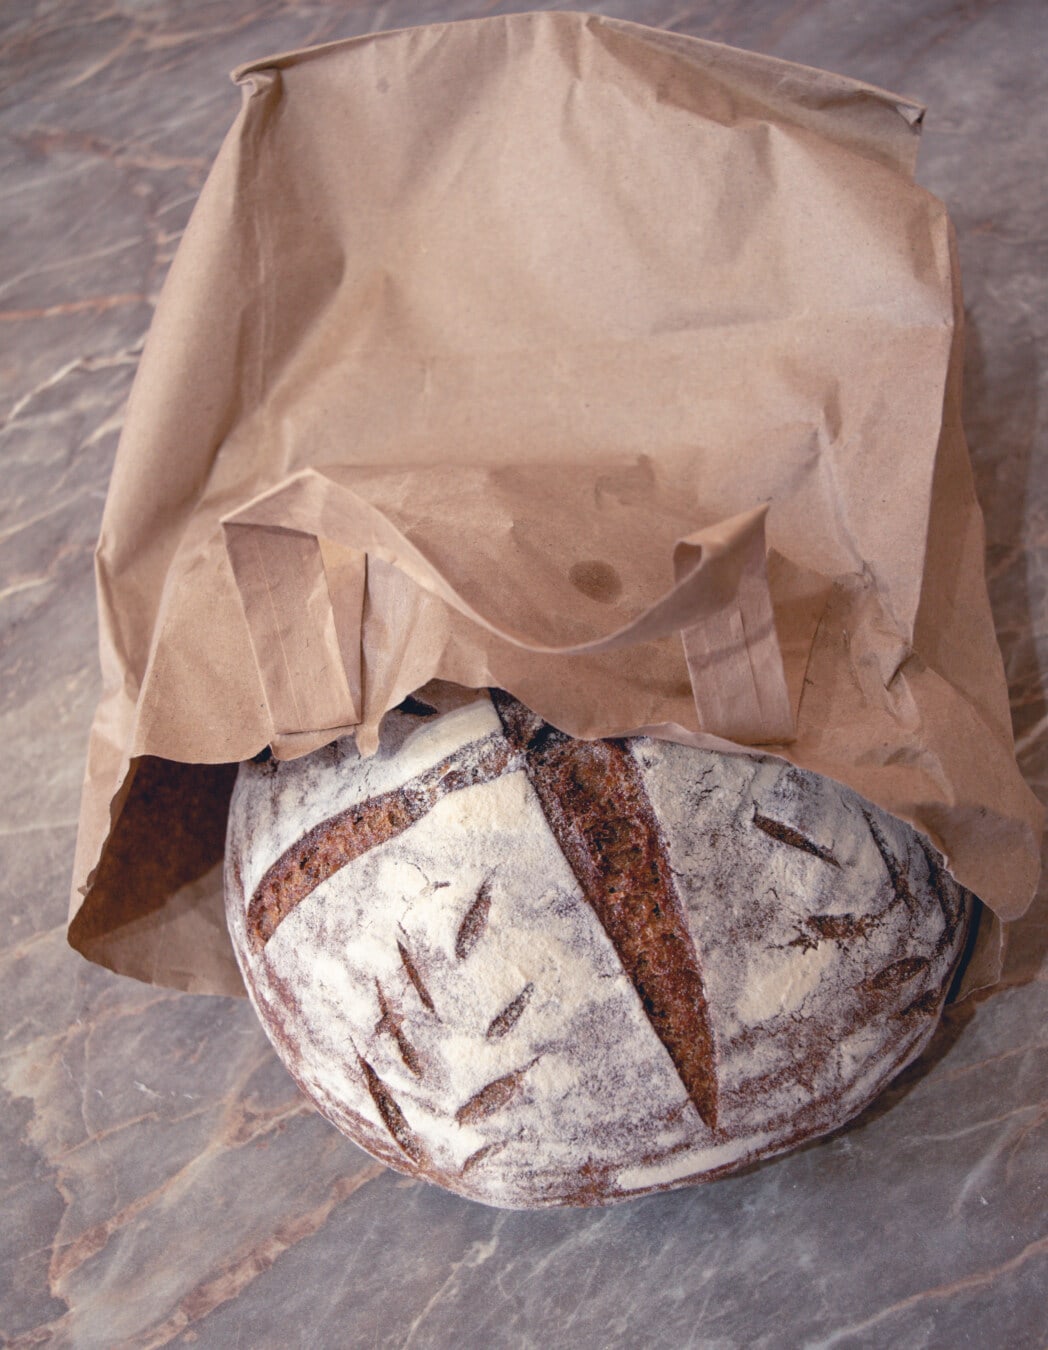 wholemeal bread, groceries, paper, organic, food, bread, flour, traditional, baked goods, crust